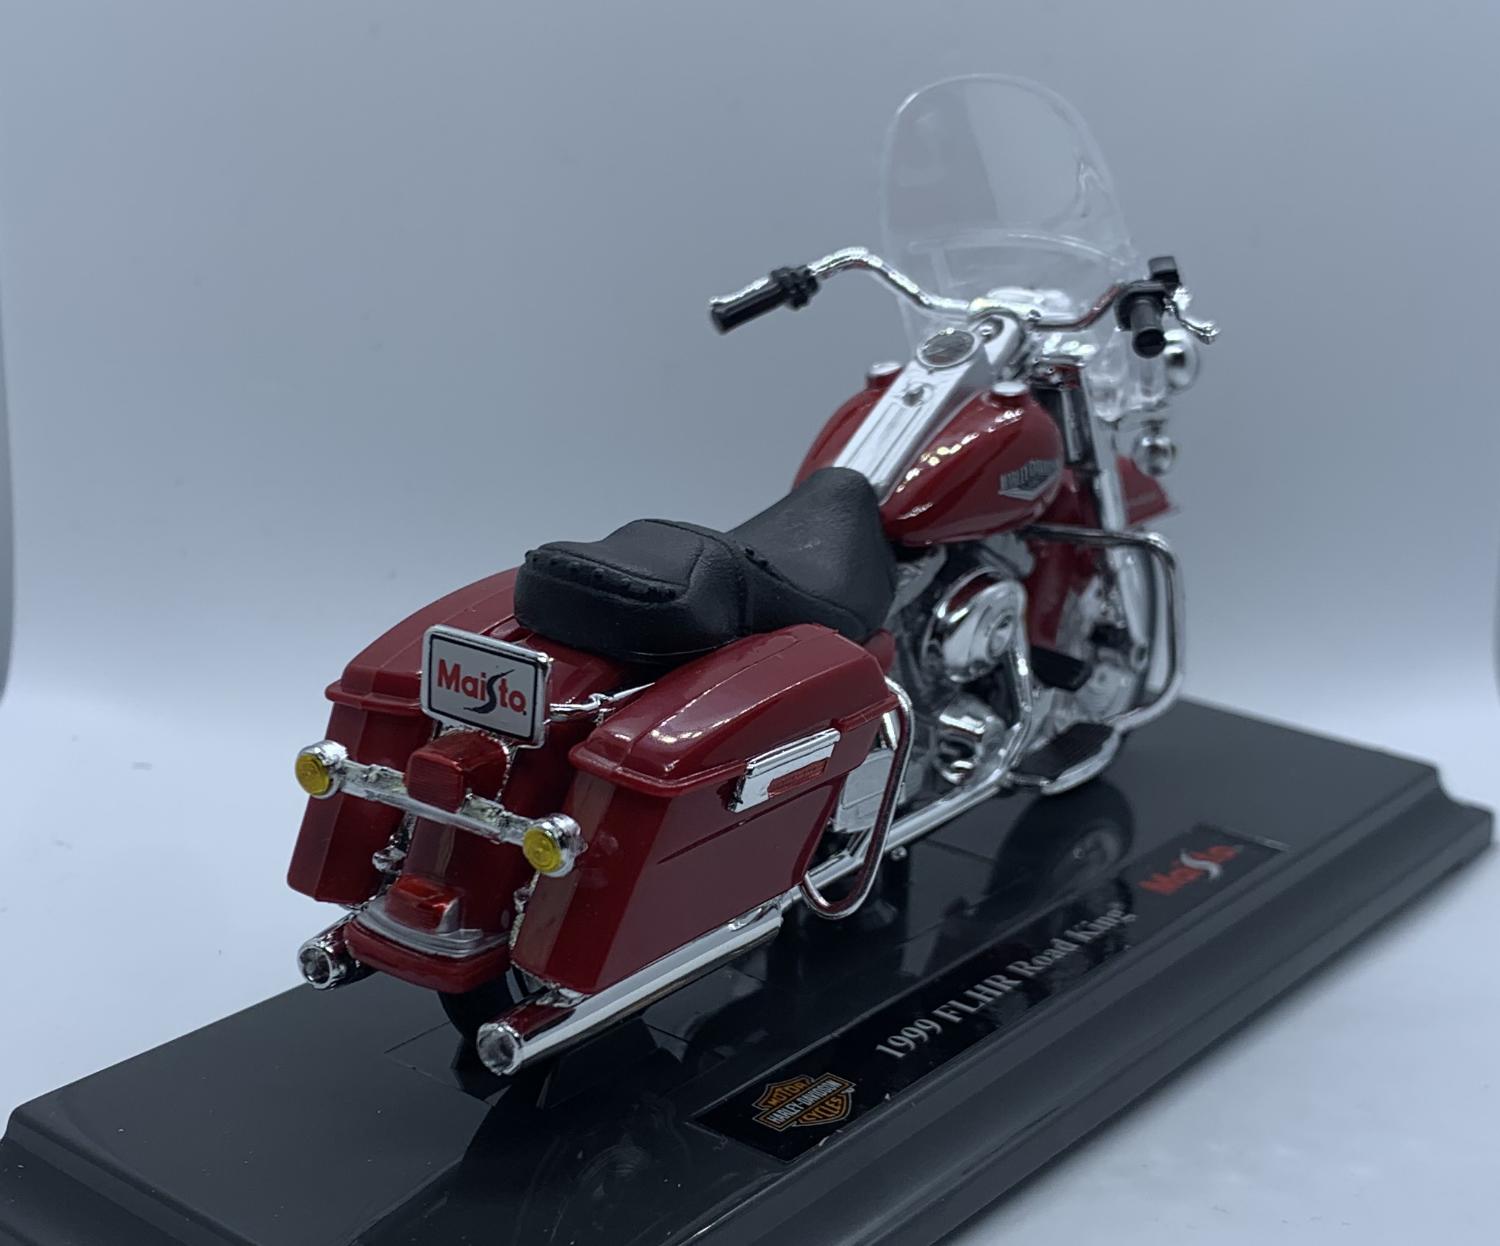 Harley Davidson 1999 FLHR Road King in Red 1:18 scale model from Maisto, 20111